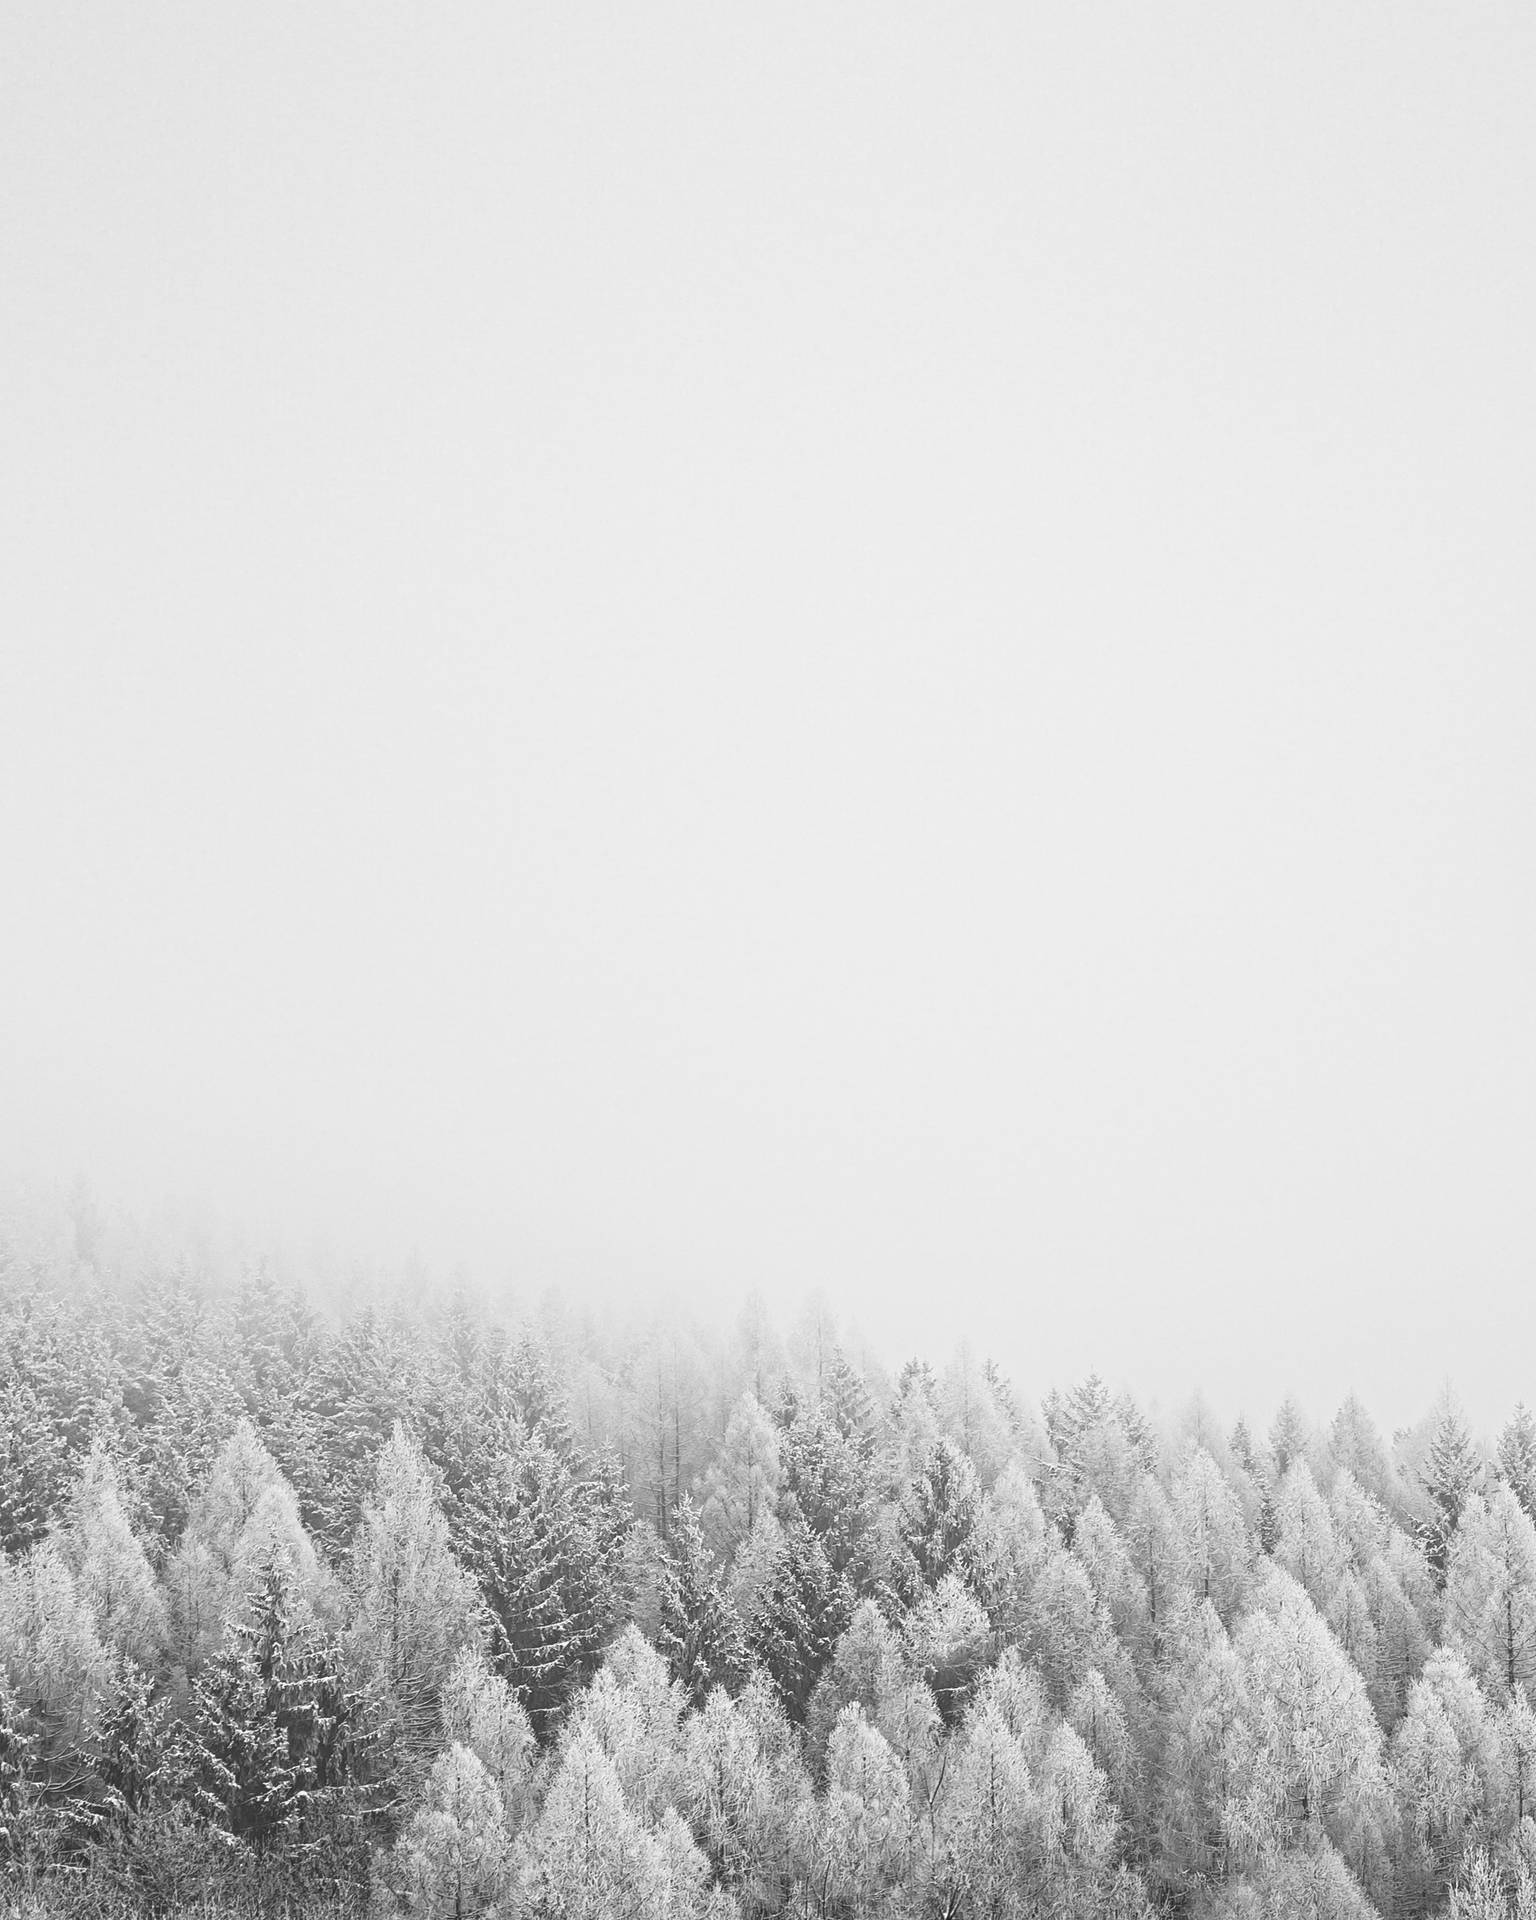 Treetops Covered In Solid White Background